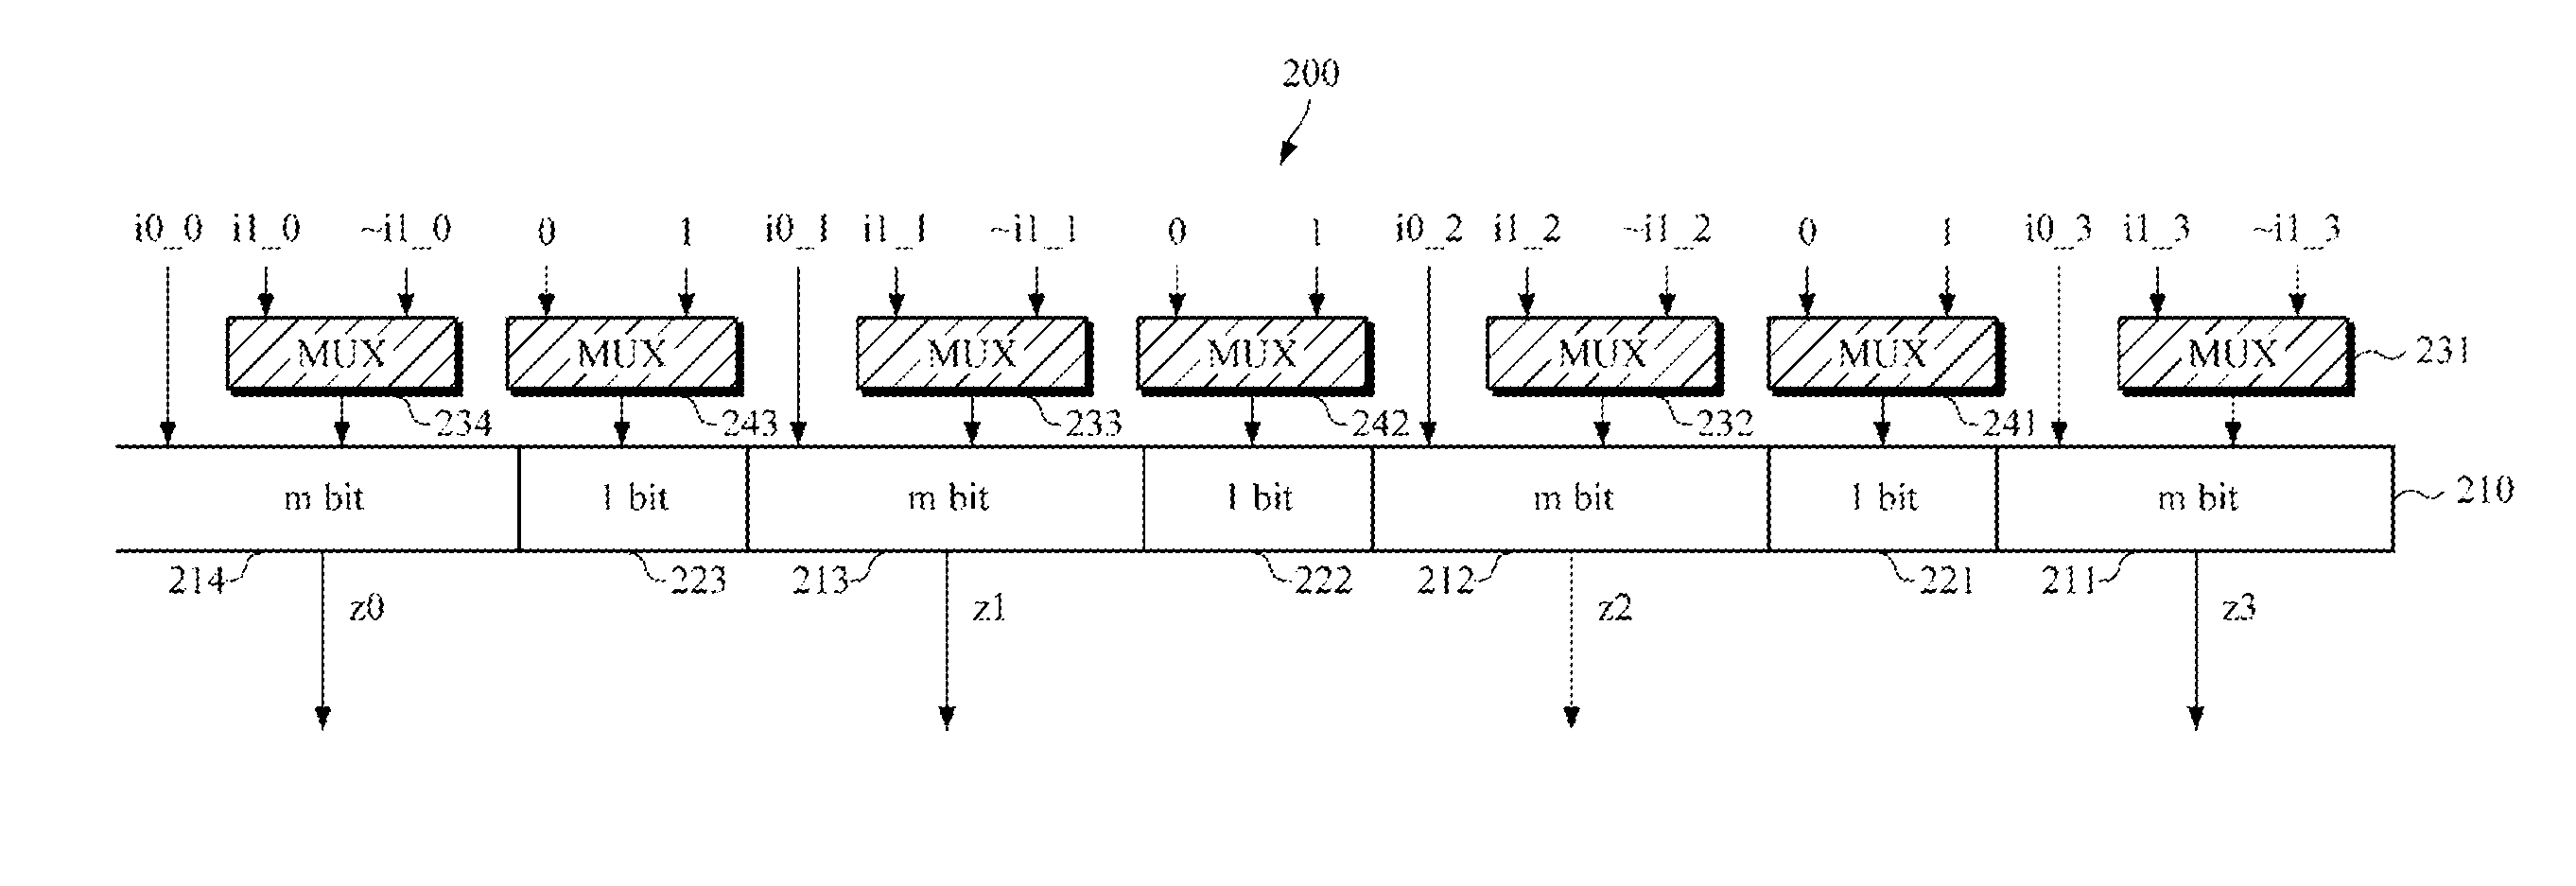 Adder capable of supporting addition and subtraction of up to n-bit data and method of supporting addition and subtraction of a plurality of data type using the adder